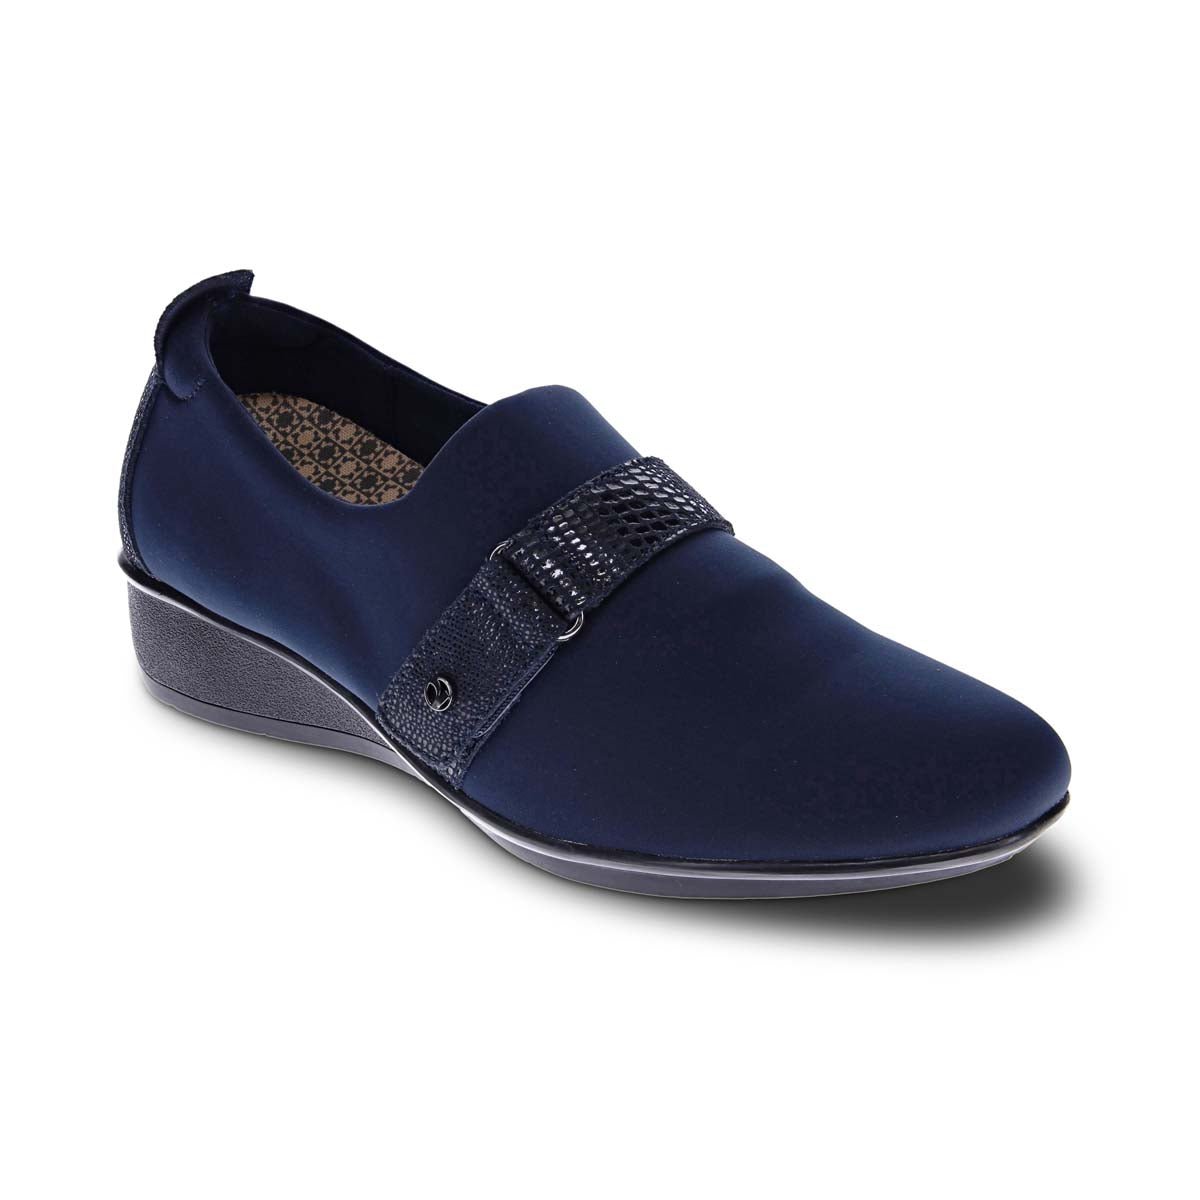 REVERE GENOA STRETCH WOMEN CASUAL SHOES IN NAVY - TLW Shoes